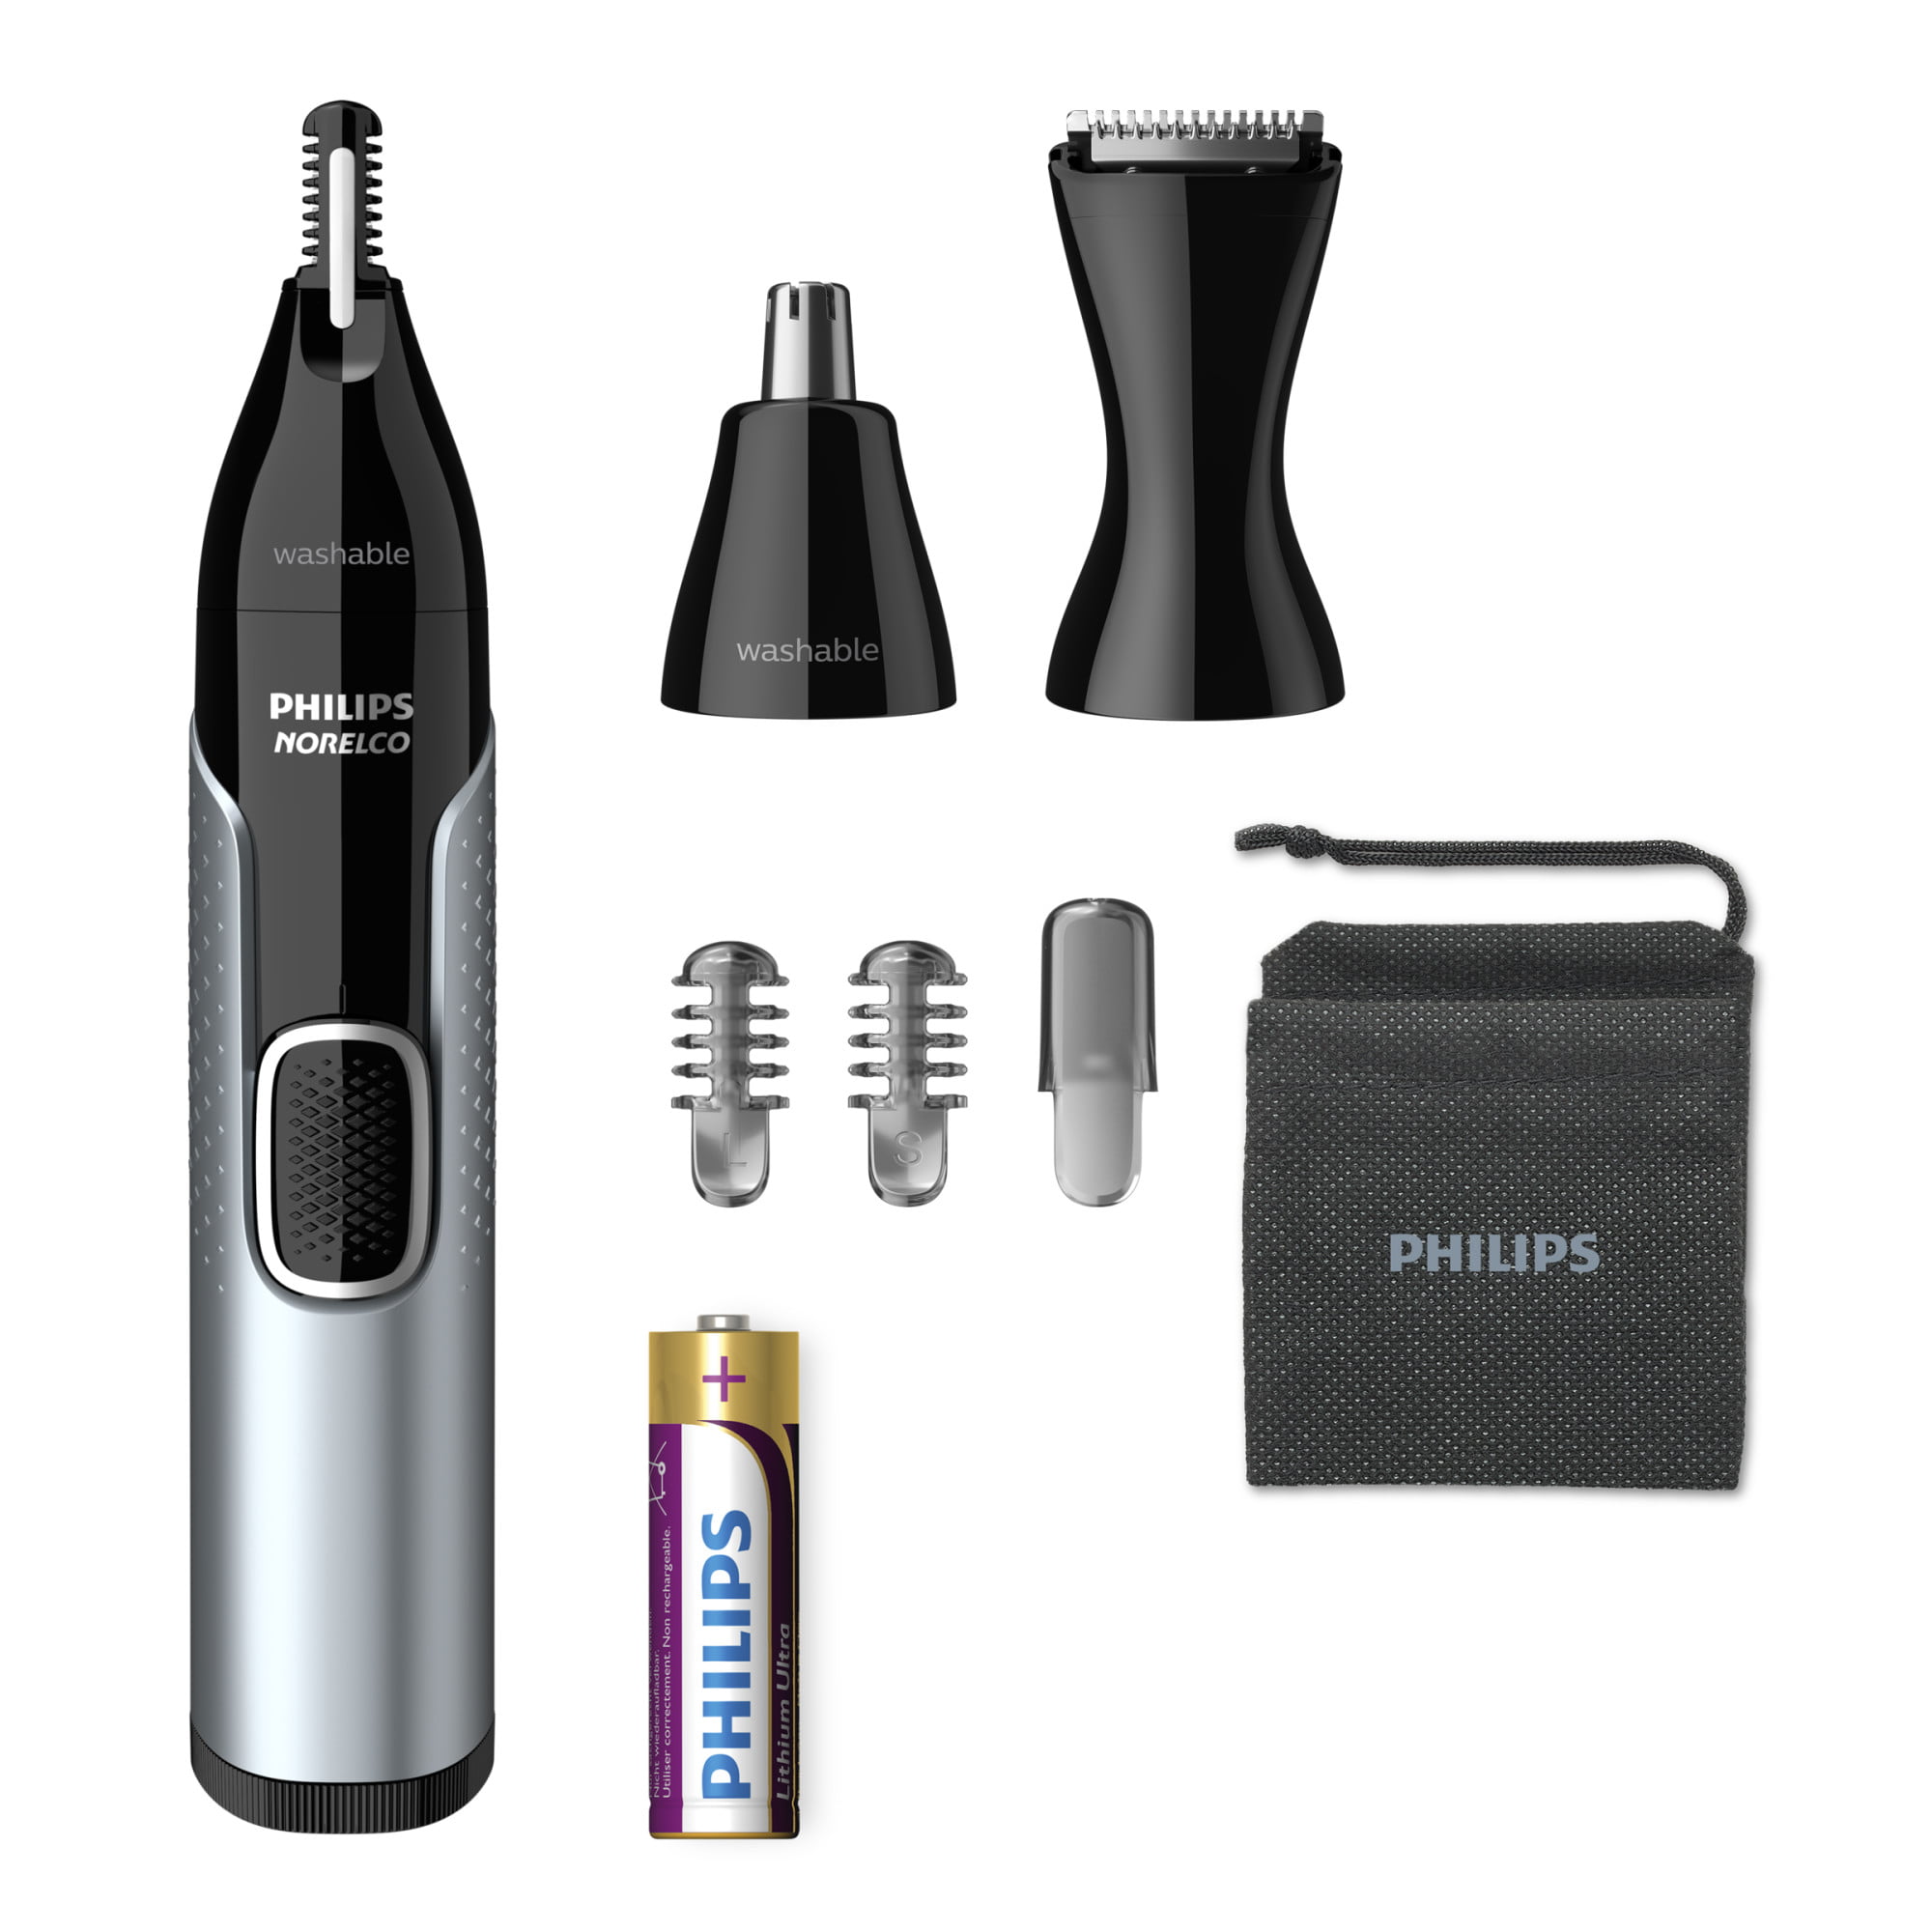 philips series 5000 nose trimmer